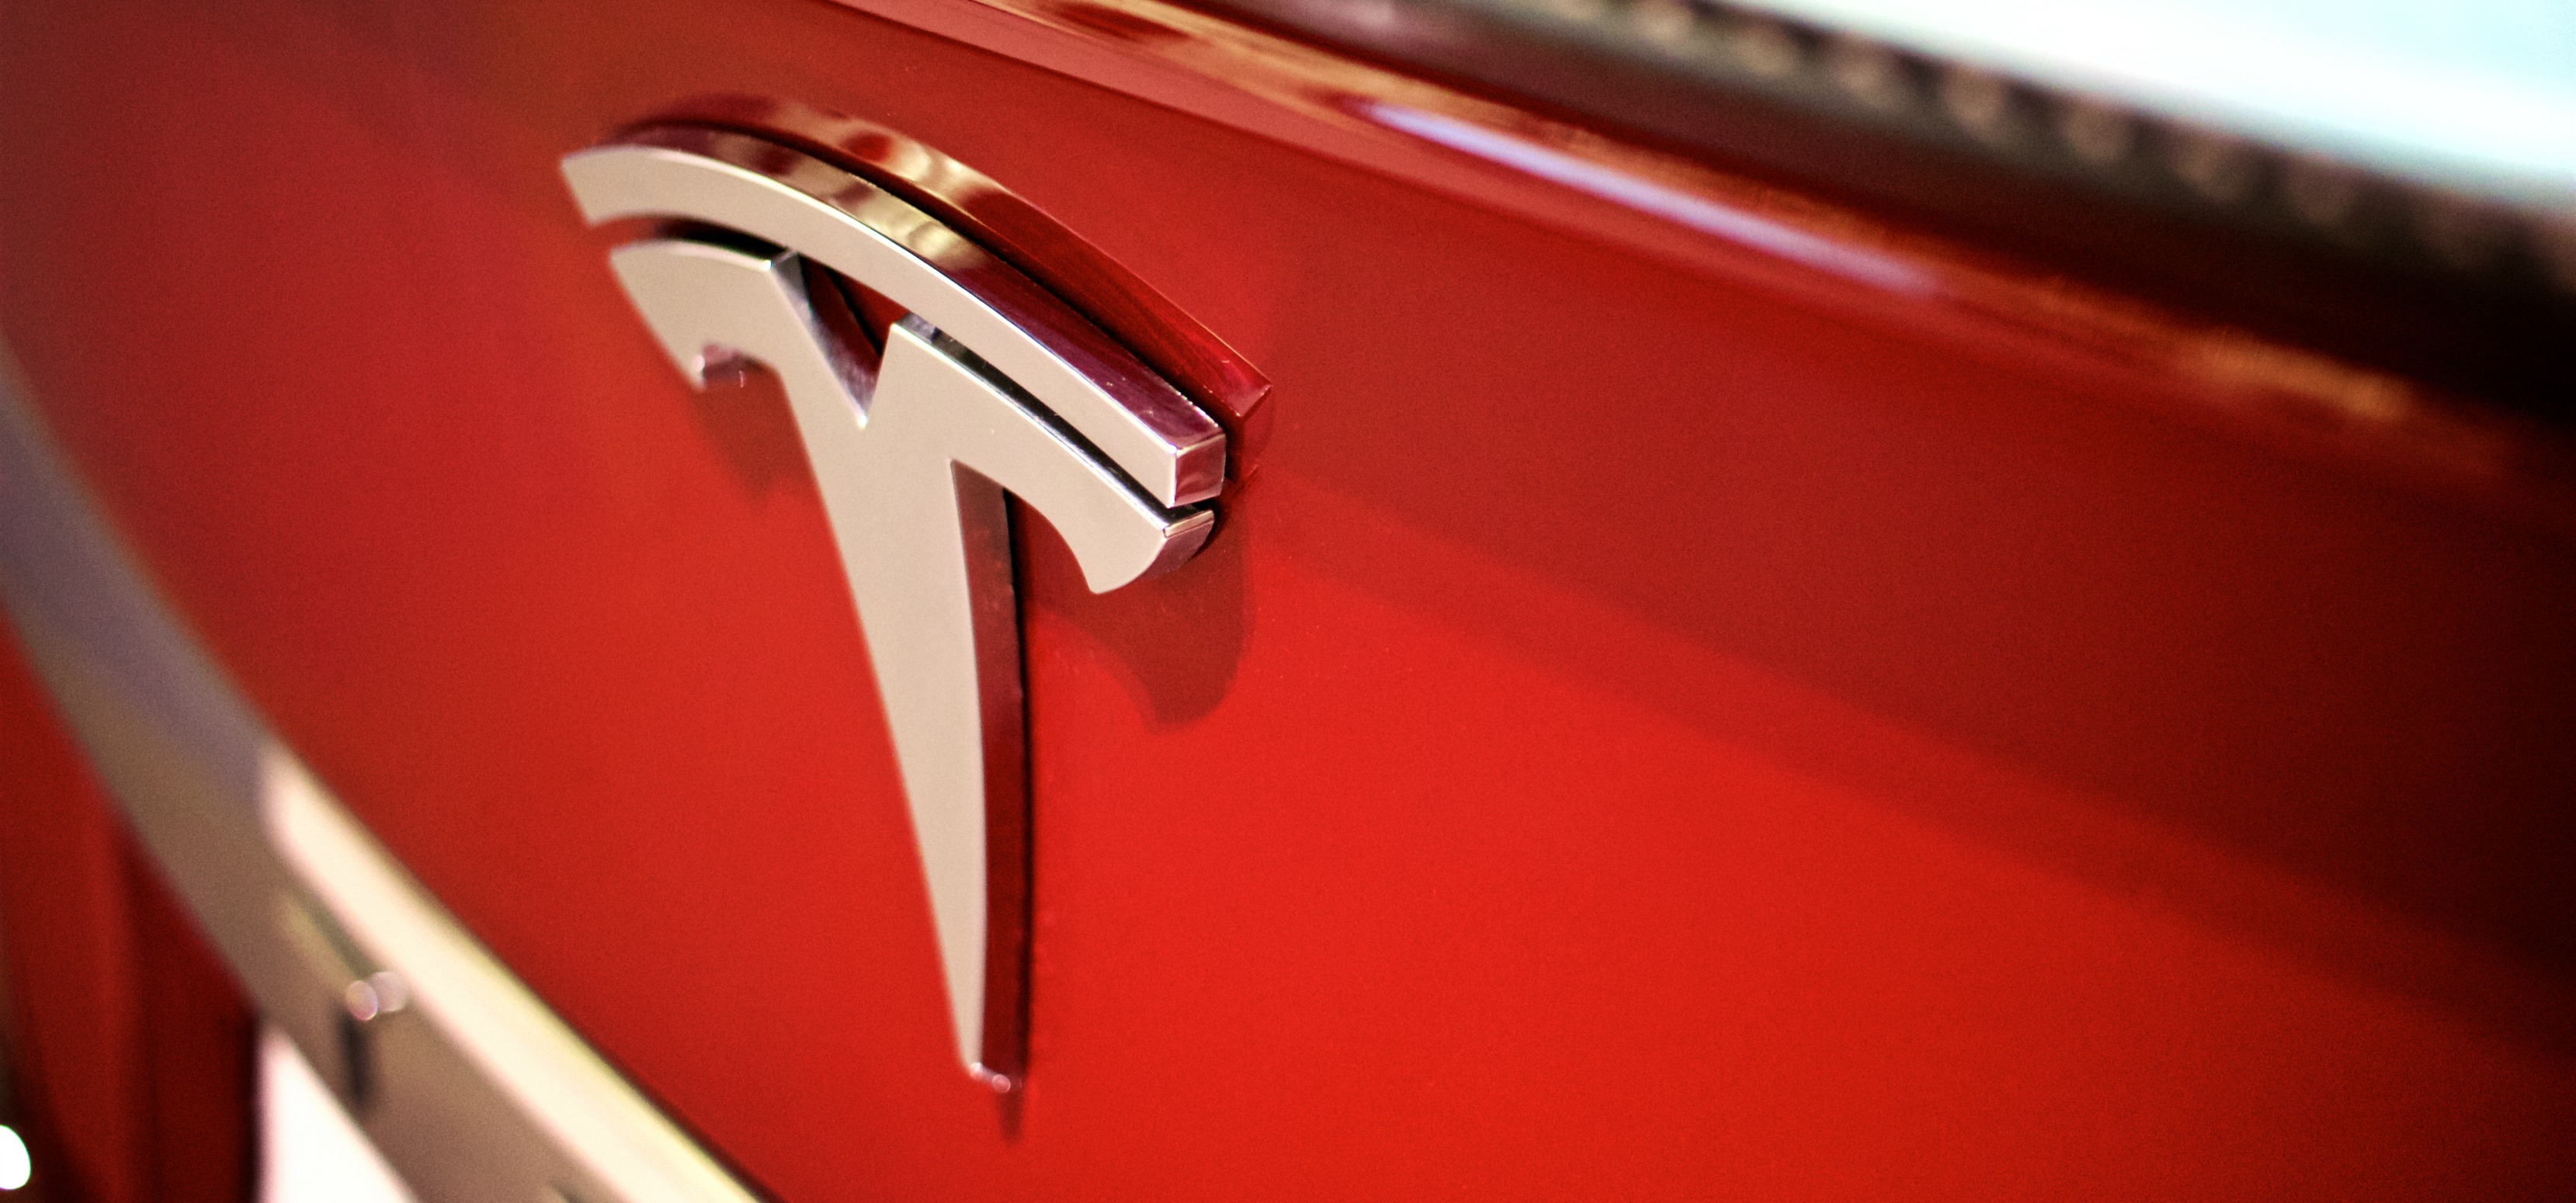 norway-proposes-tesla-tax-on-heavy-electric-cars